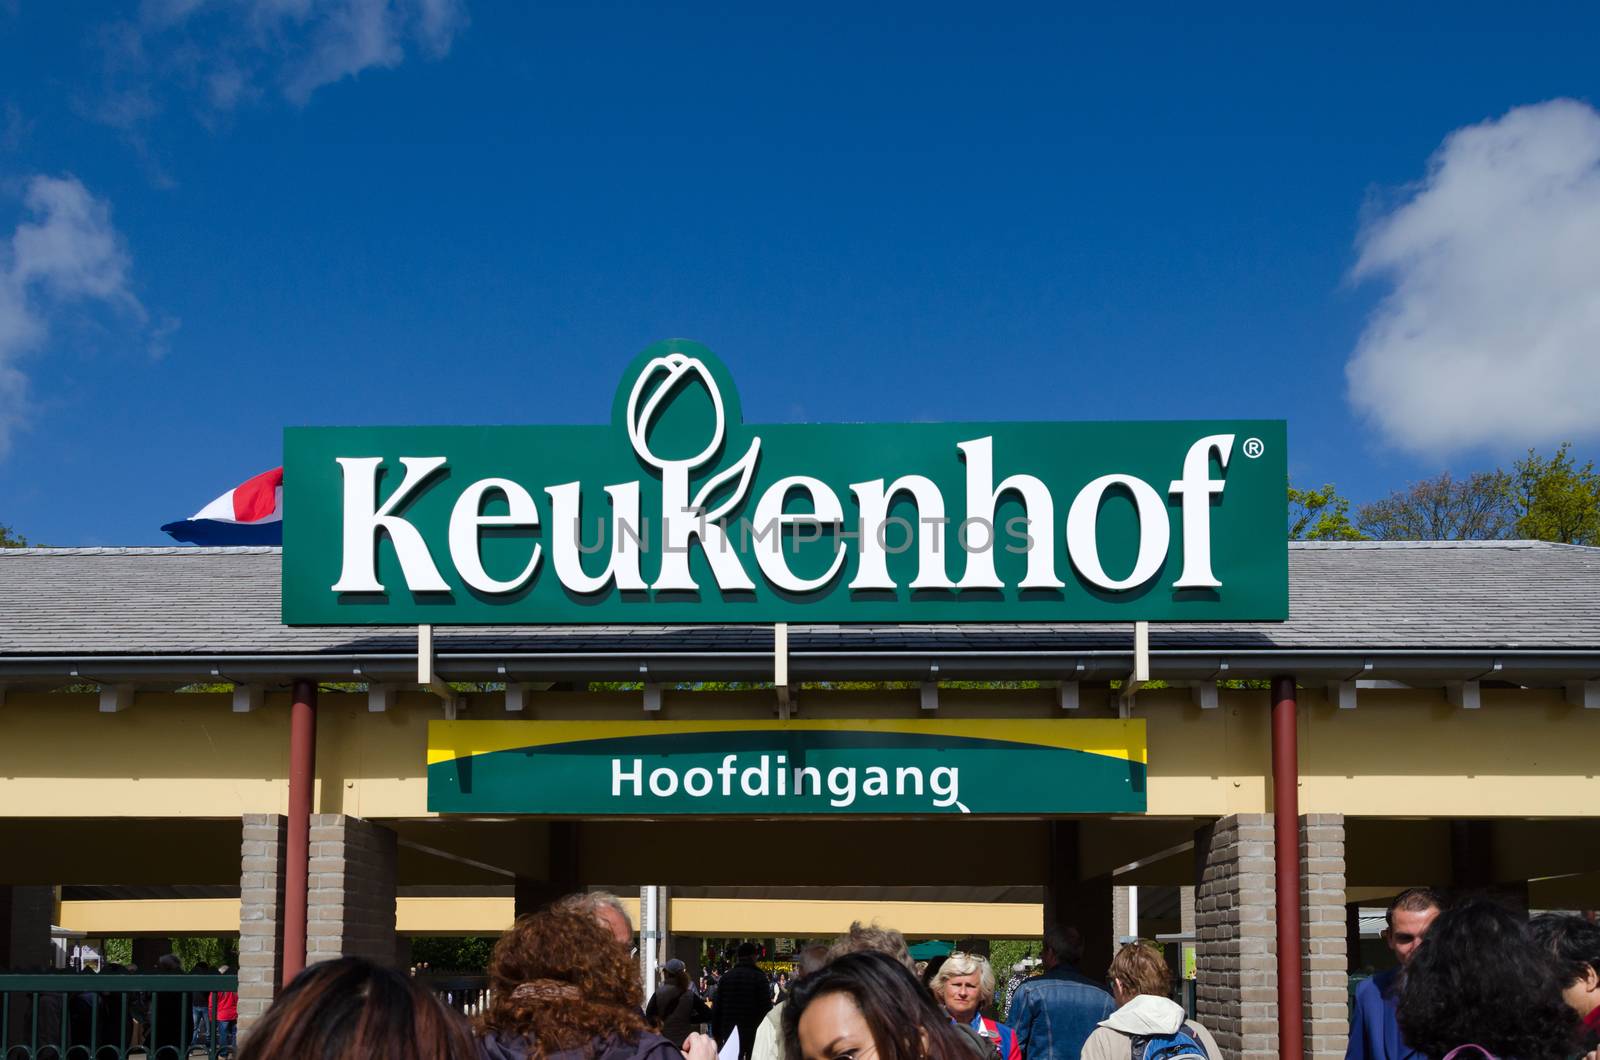 Lisse, Netherlands - May 7, 2015: Tourists at the Entrance into the Keukenhof Garden on May 7, 2015. Keukenhof is the most beautiful spring garden in the world.